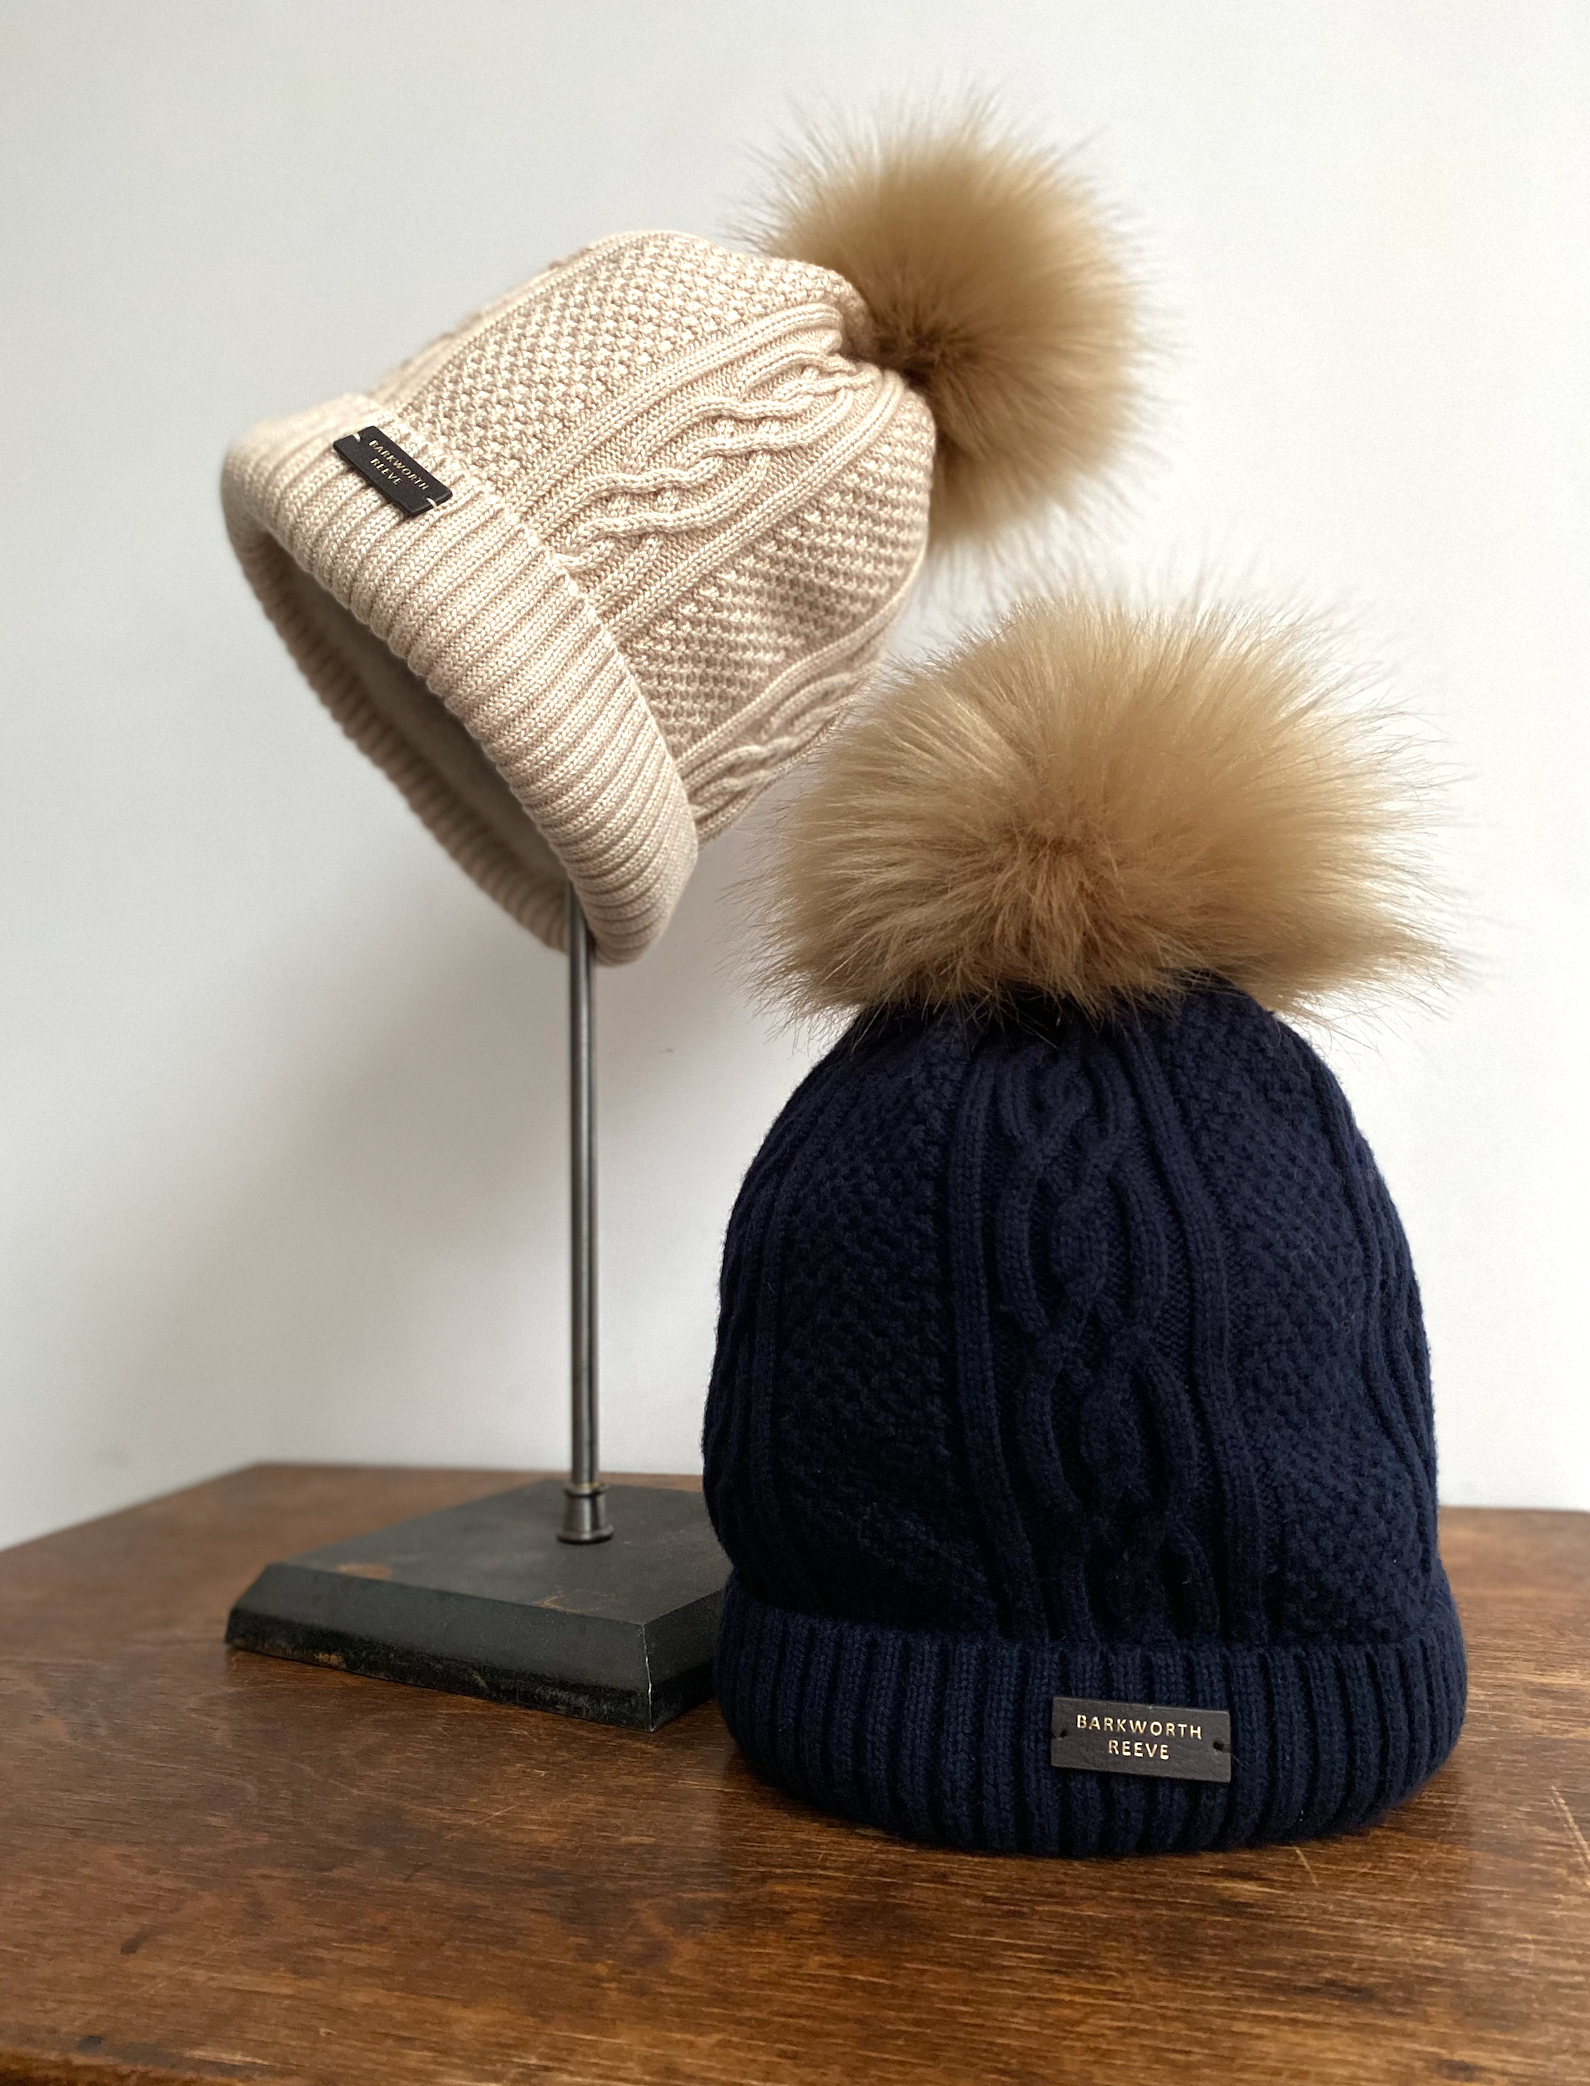 Knitted, Lined Bobble Hat in  Cream Cashmere, Wool & Cotton Mix Yarn